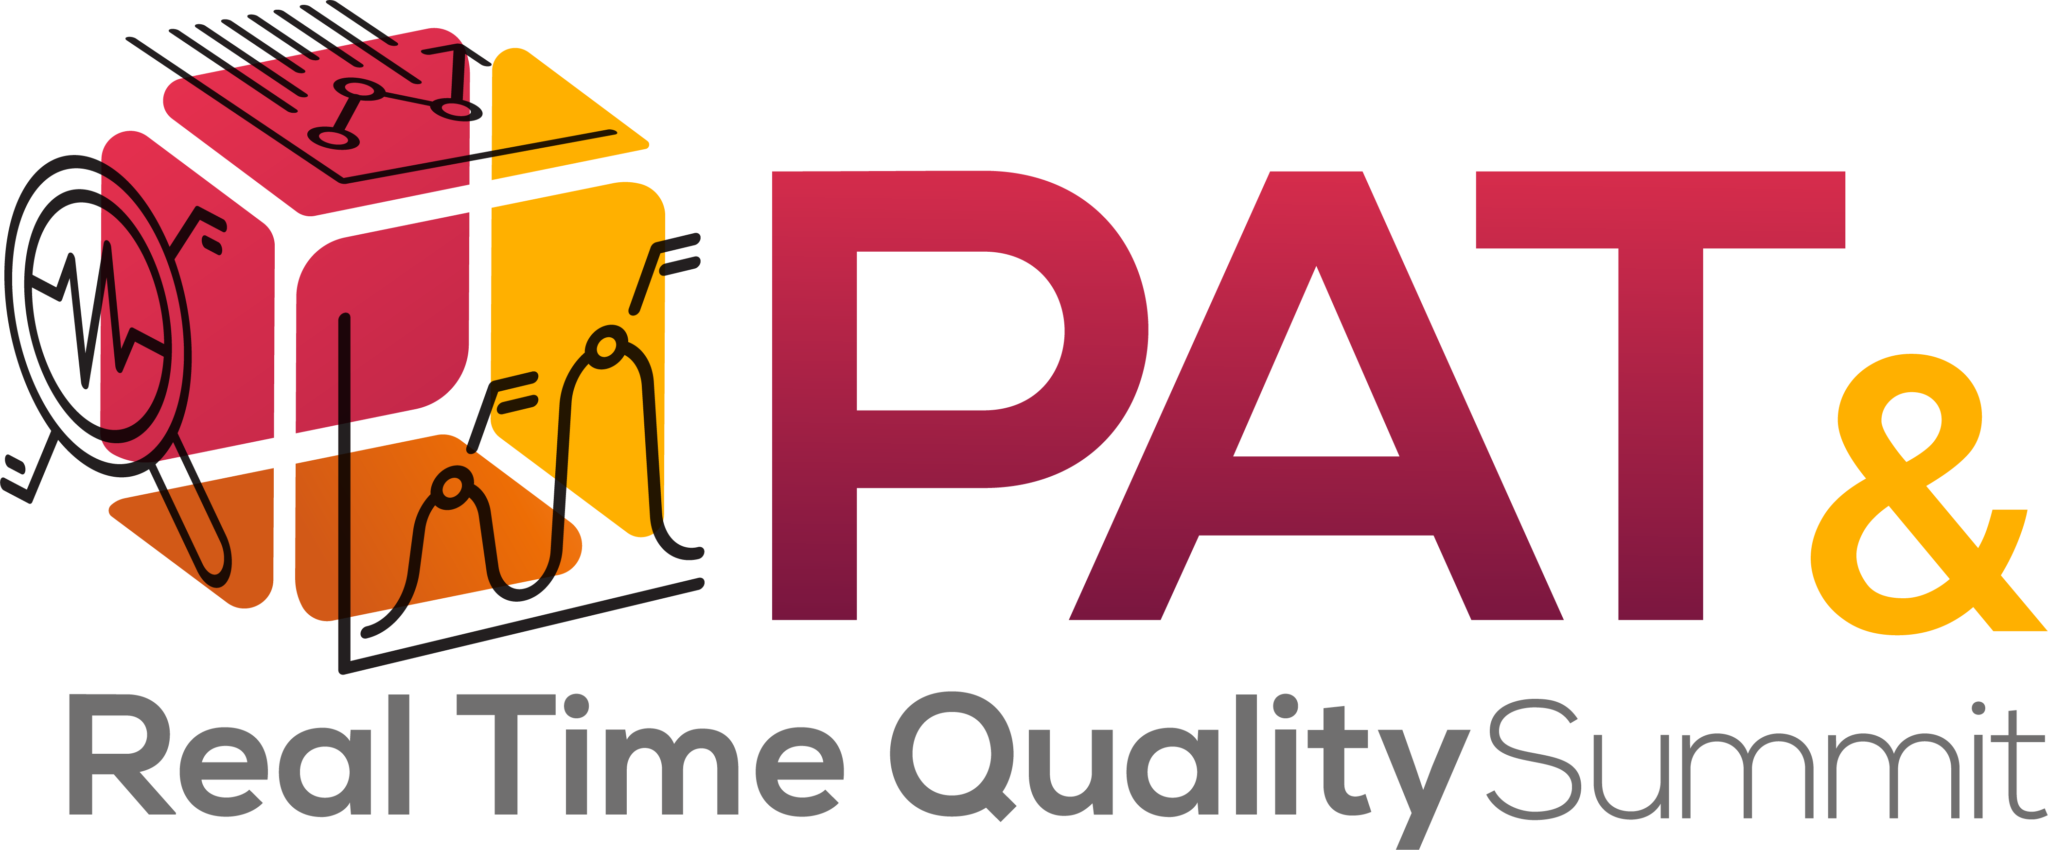 2356-PAT-Real-Time-Quality-Summit-logo-FINAL-1-1-2048x850